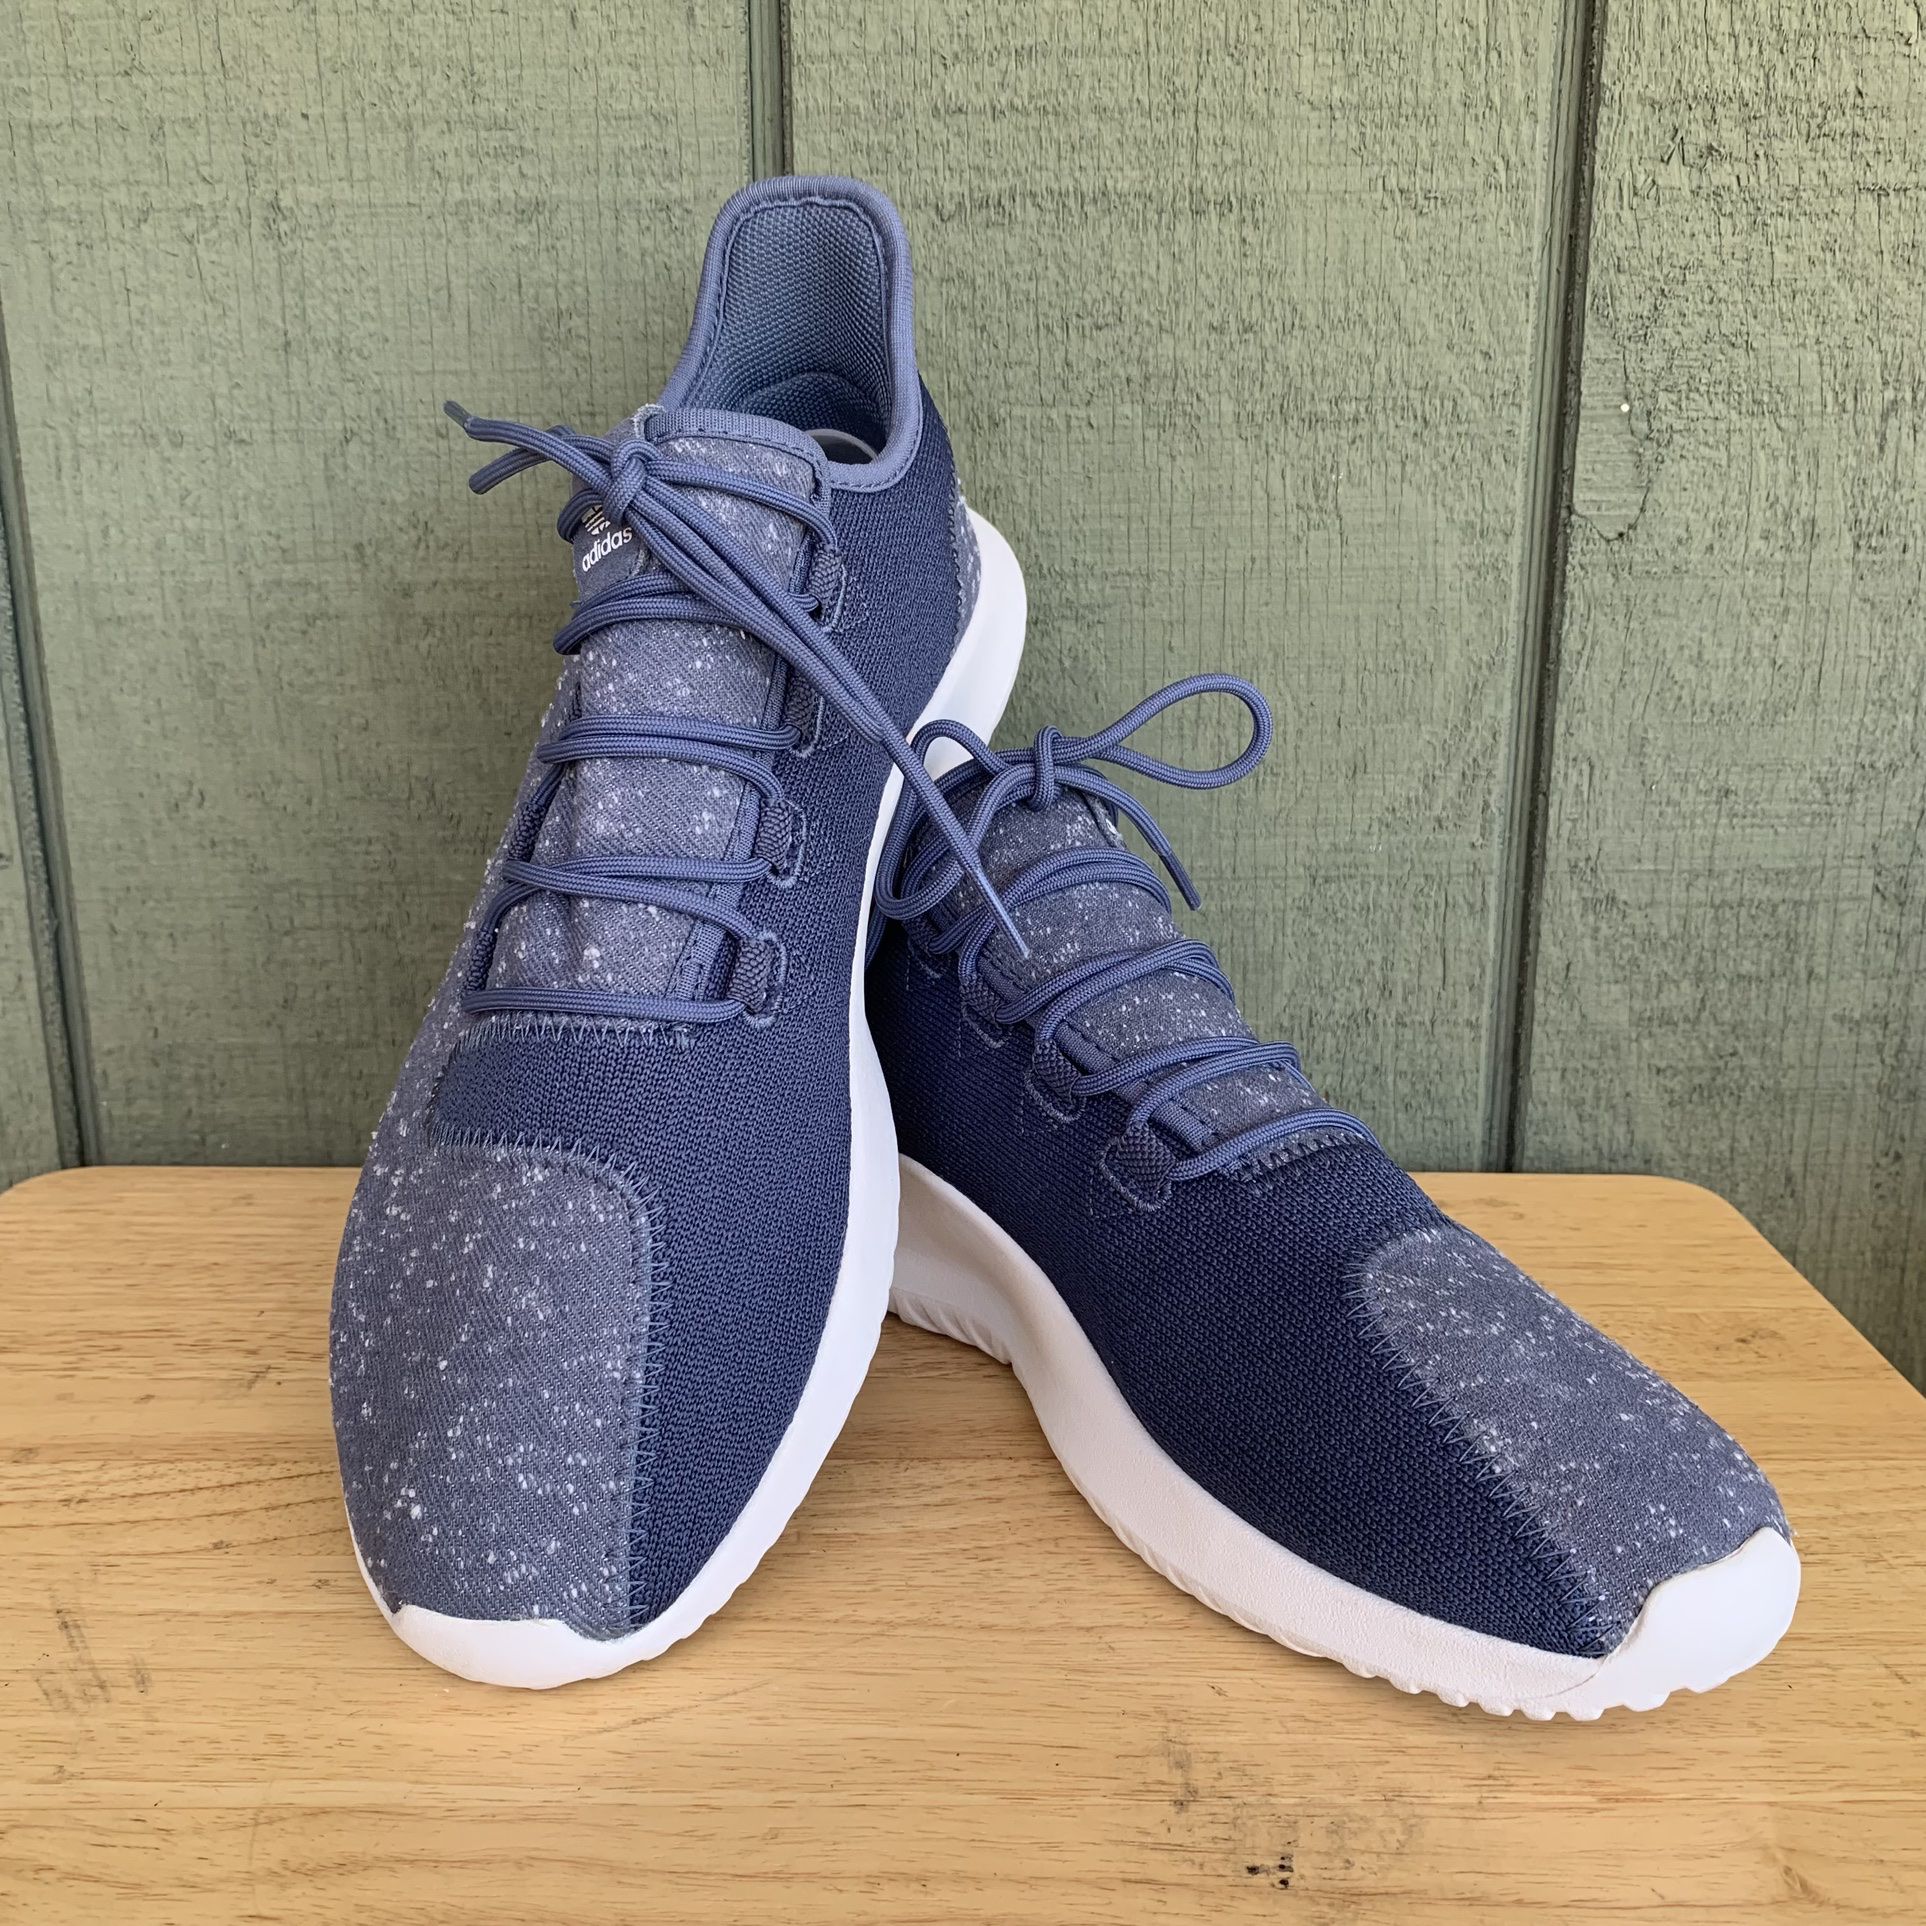 Adidas Tubular Shadow Tech Ink Men's Sz 10.5 Blue Athletic Shoes Sneakers BY3572 Sale in City Of CA - OfferUp